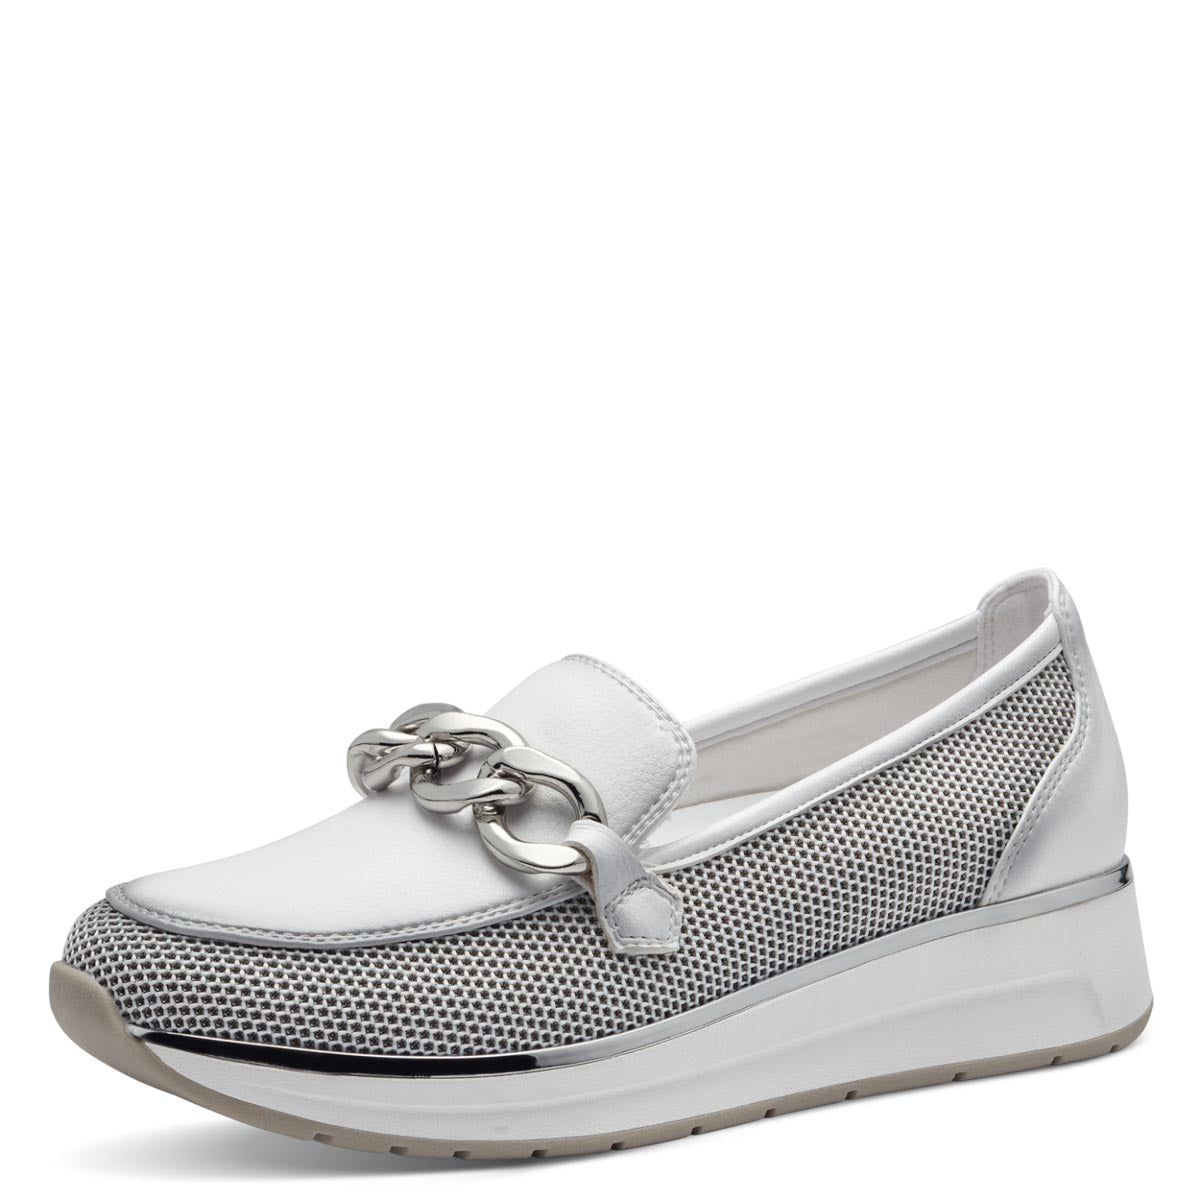 Marco Tozzi White Loafer with Silver Chain Detail and Wedge Sole